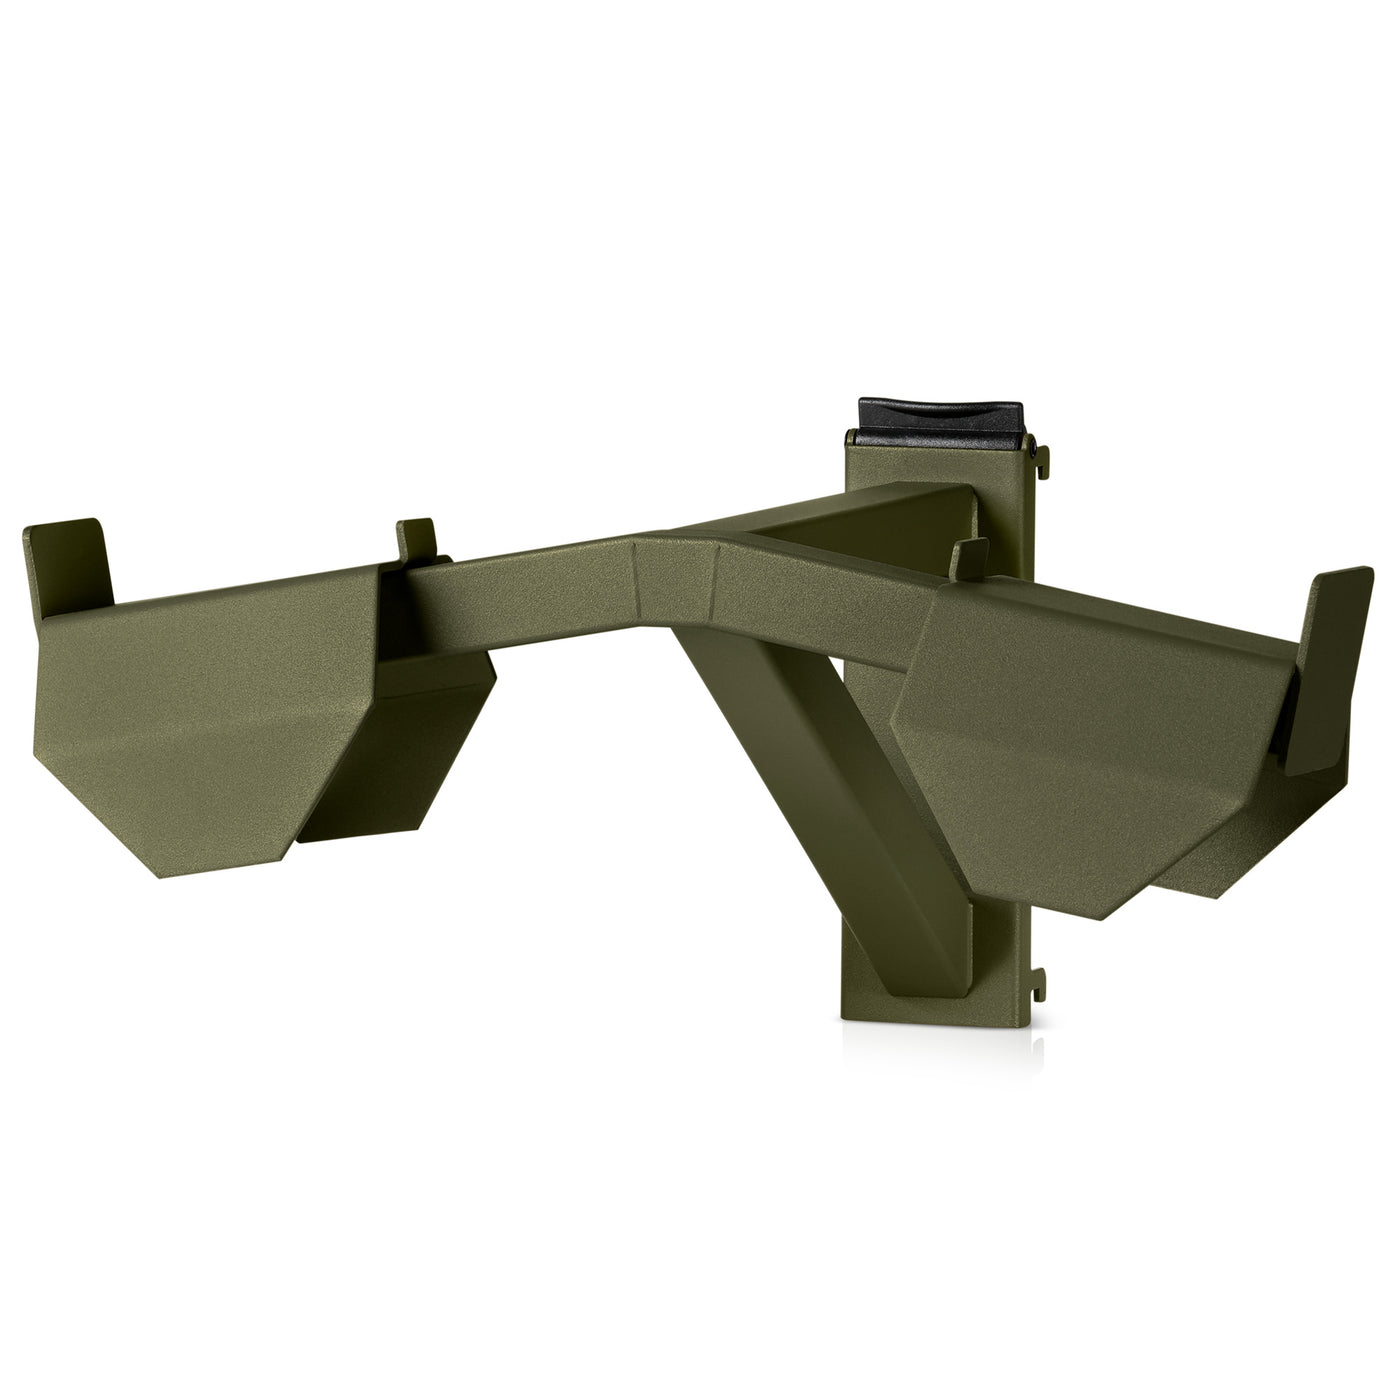 Wall Rack System Attachment - Tactical Vest Rack - Green